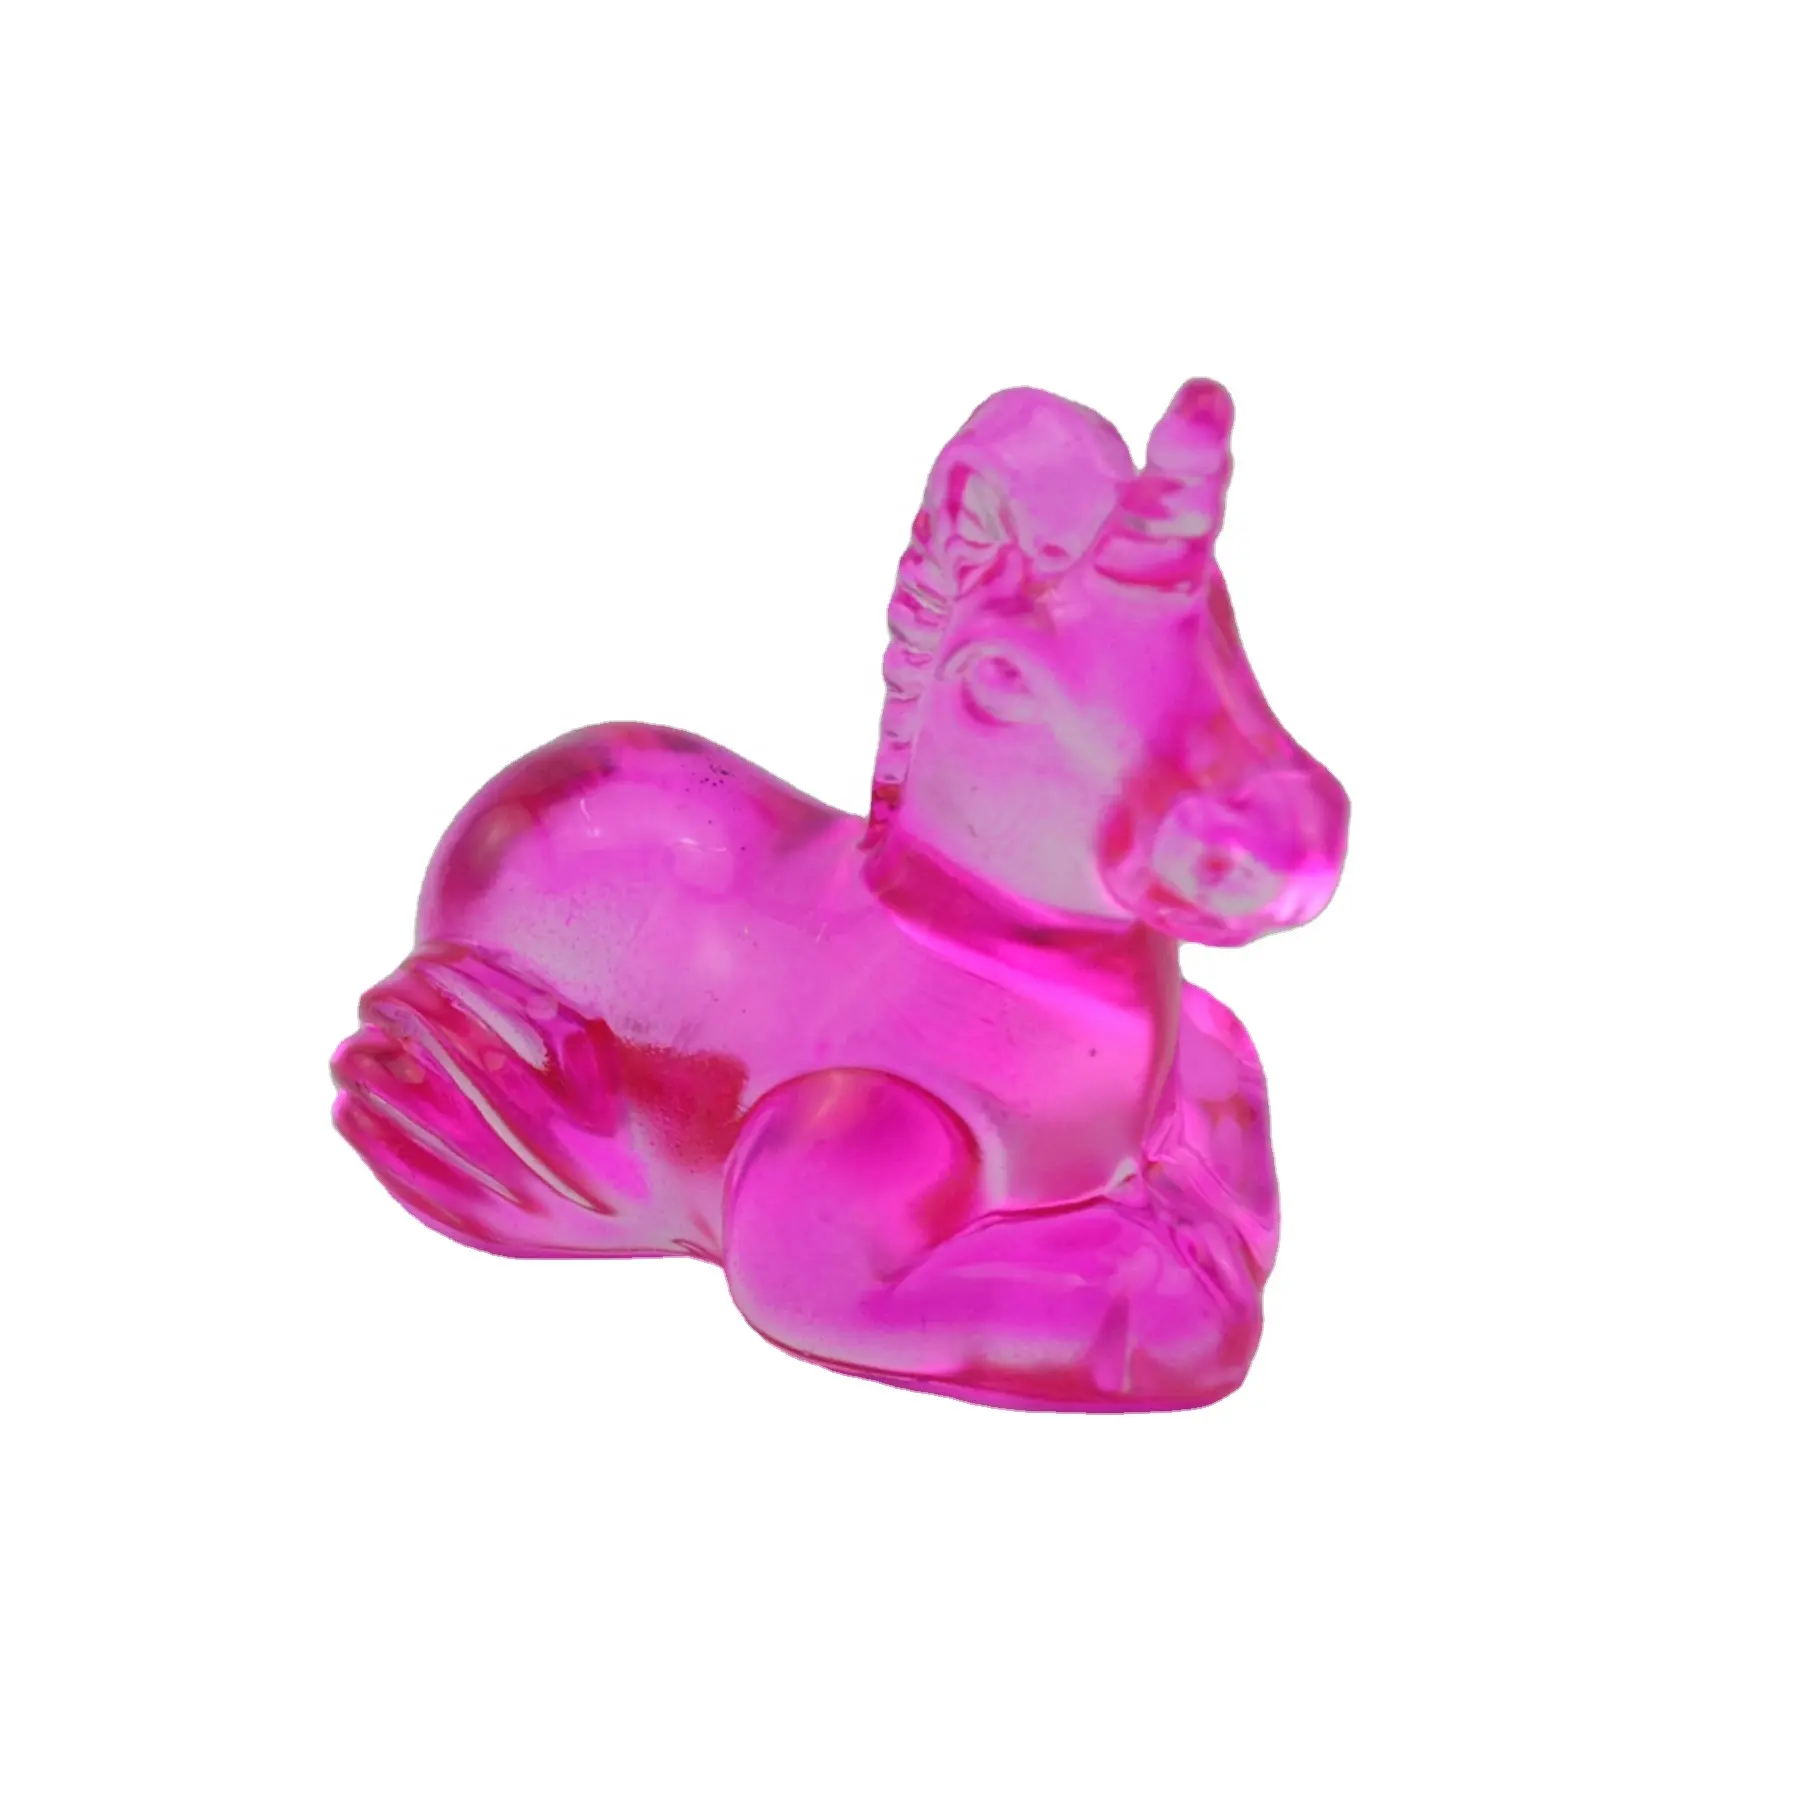 Hot Selling Glass Gifts Small Statues Glass Animals Crafts Colorful Glass Unicorns